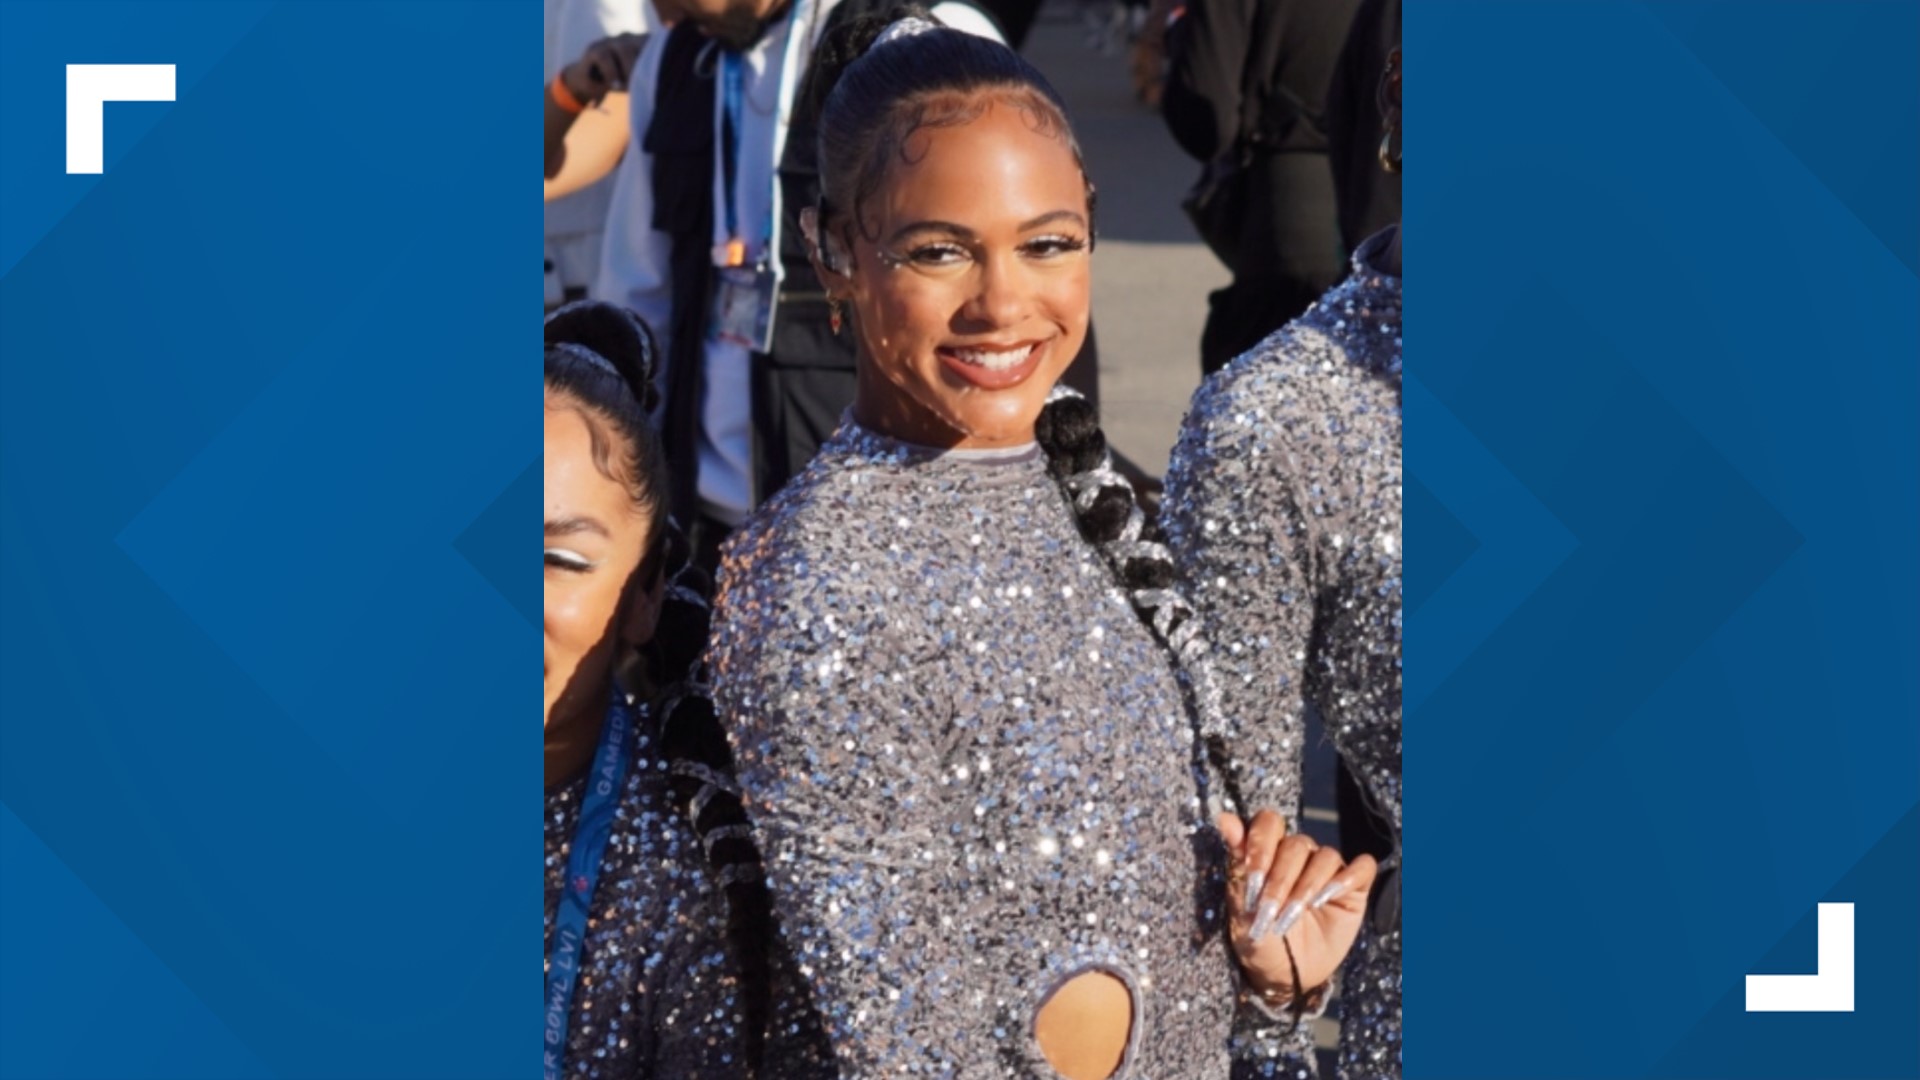 Jhana Waddell's no stranger to big performances. She's danced alongside Selena Gomez and Bruno Mars and has even toured with Lil Baby and Future.